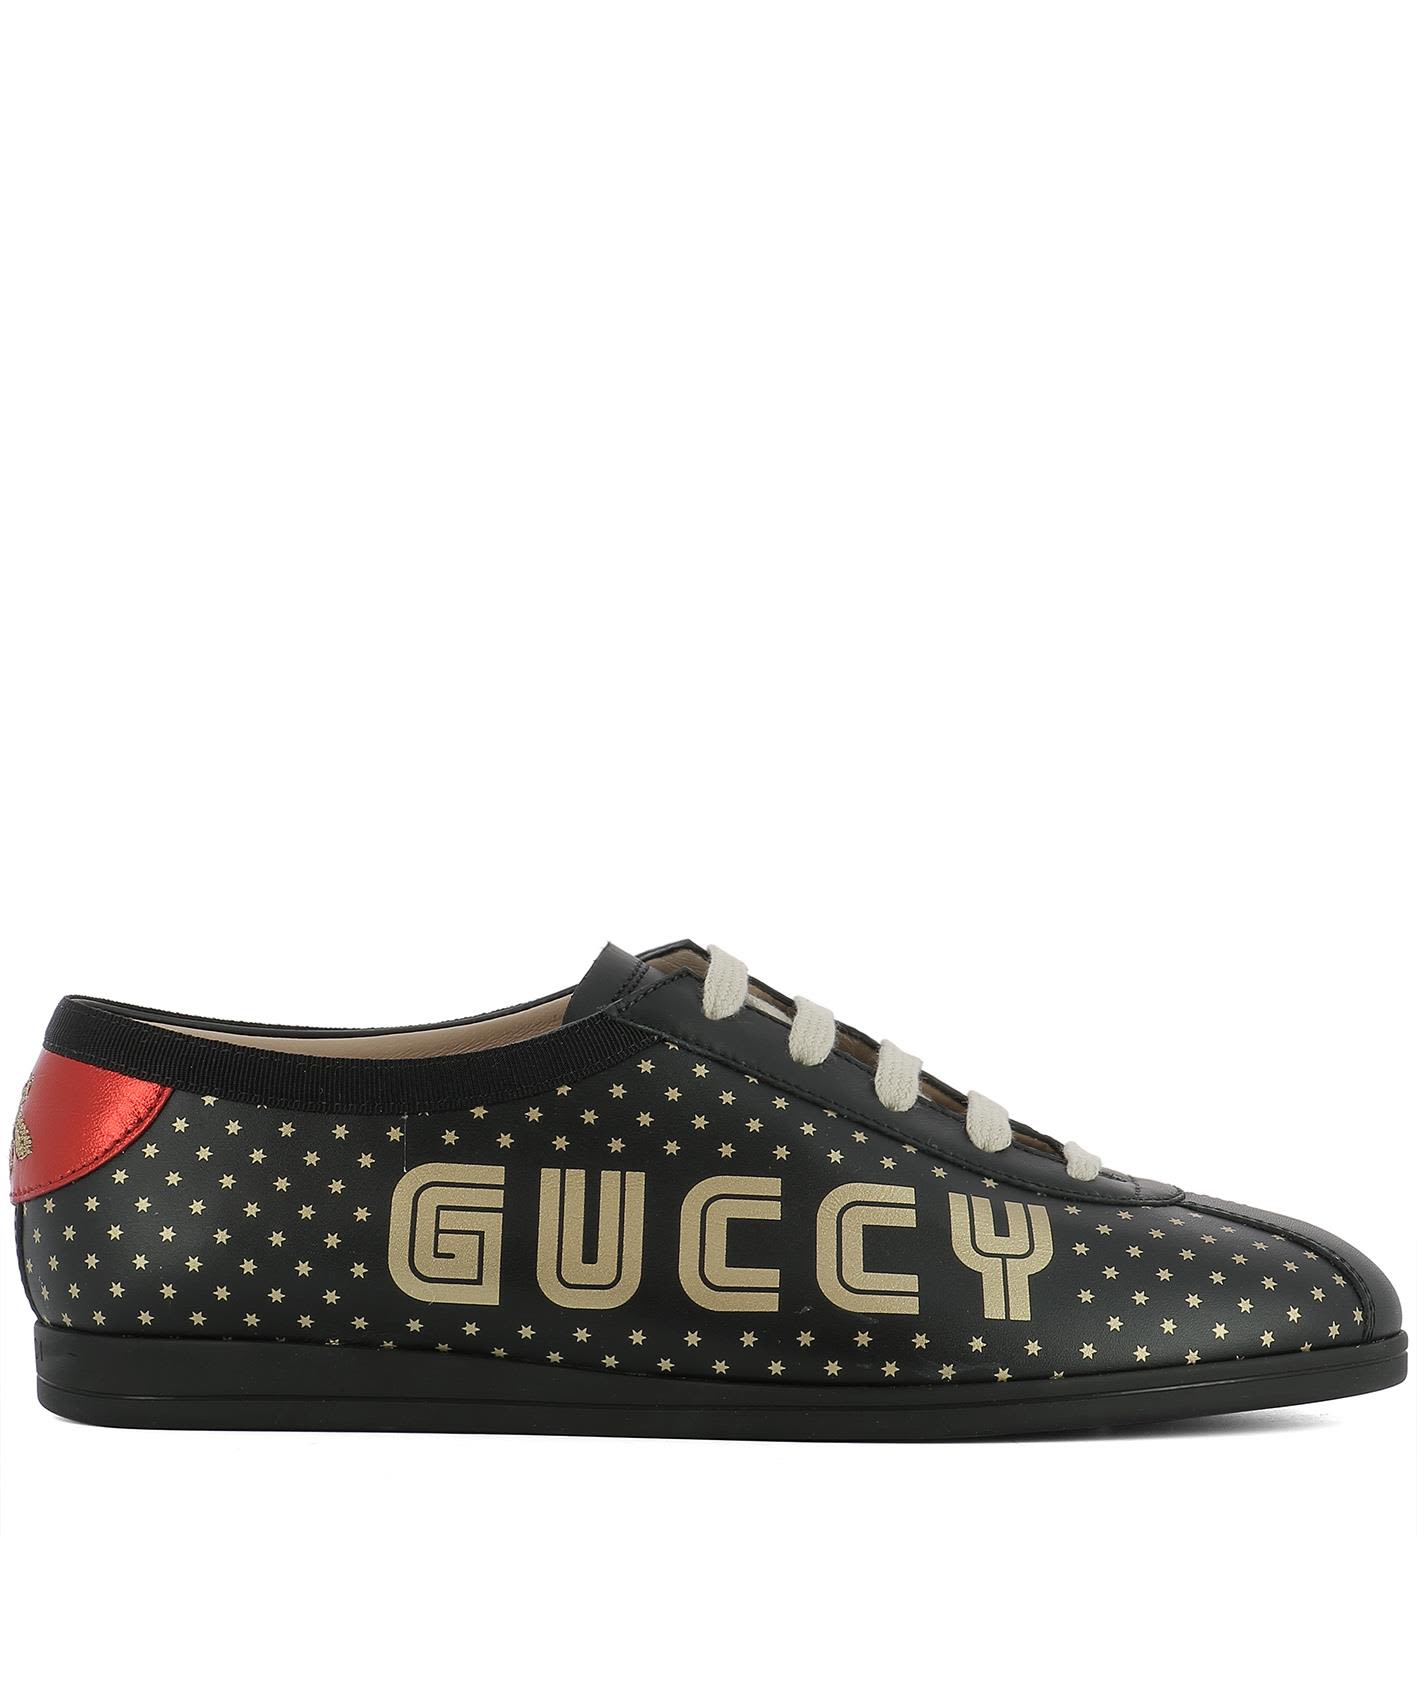 GUCCI BLACK LEATHER SNEAKERS,10589306